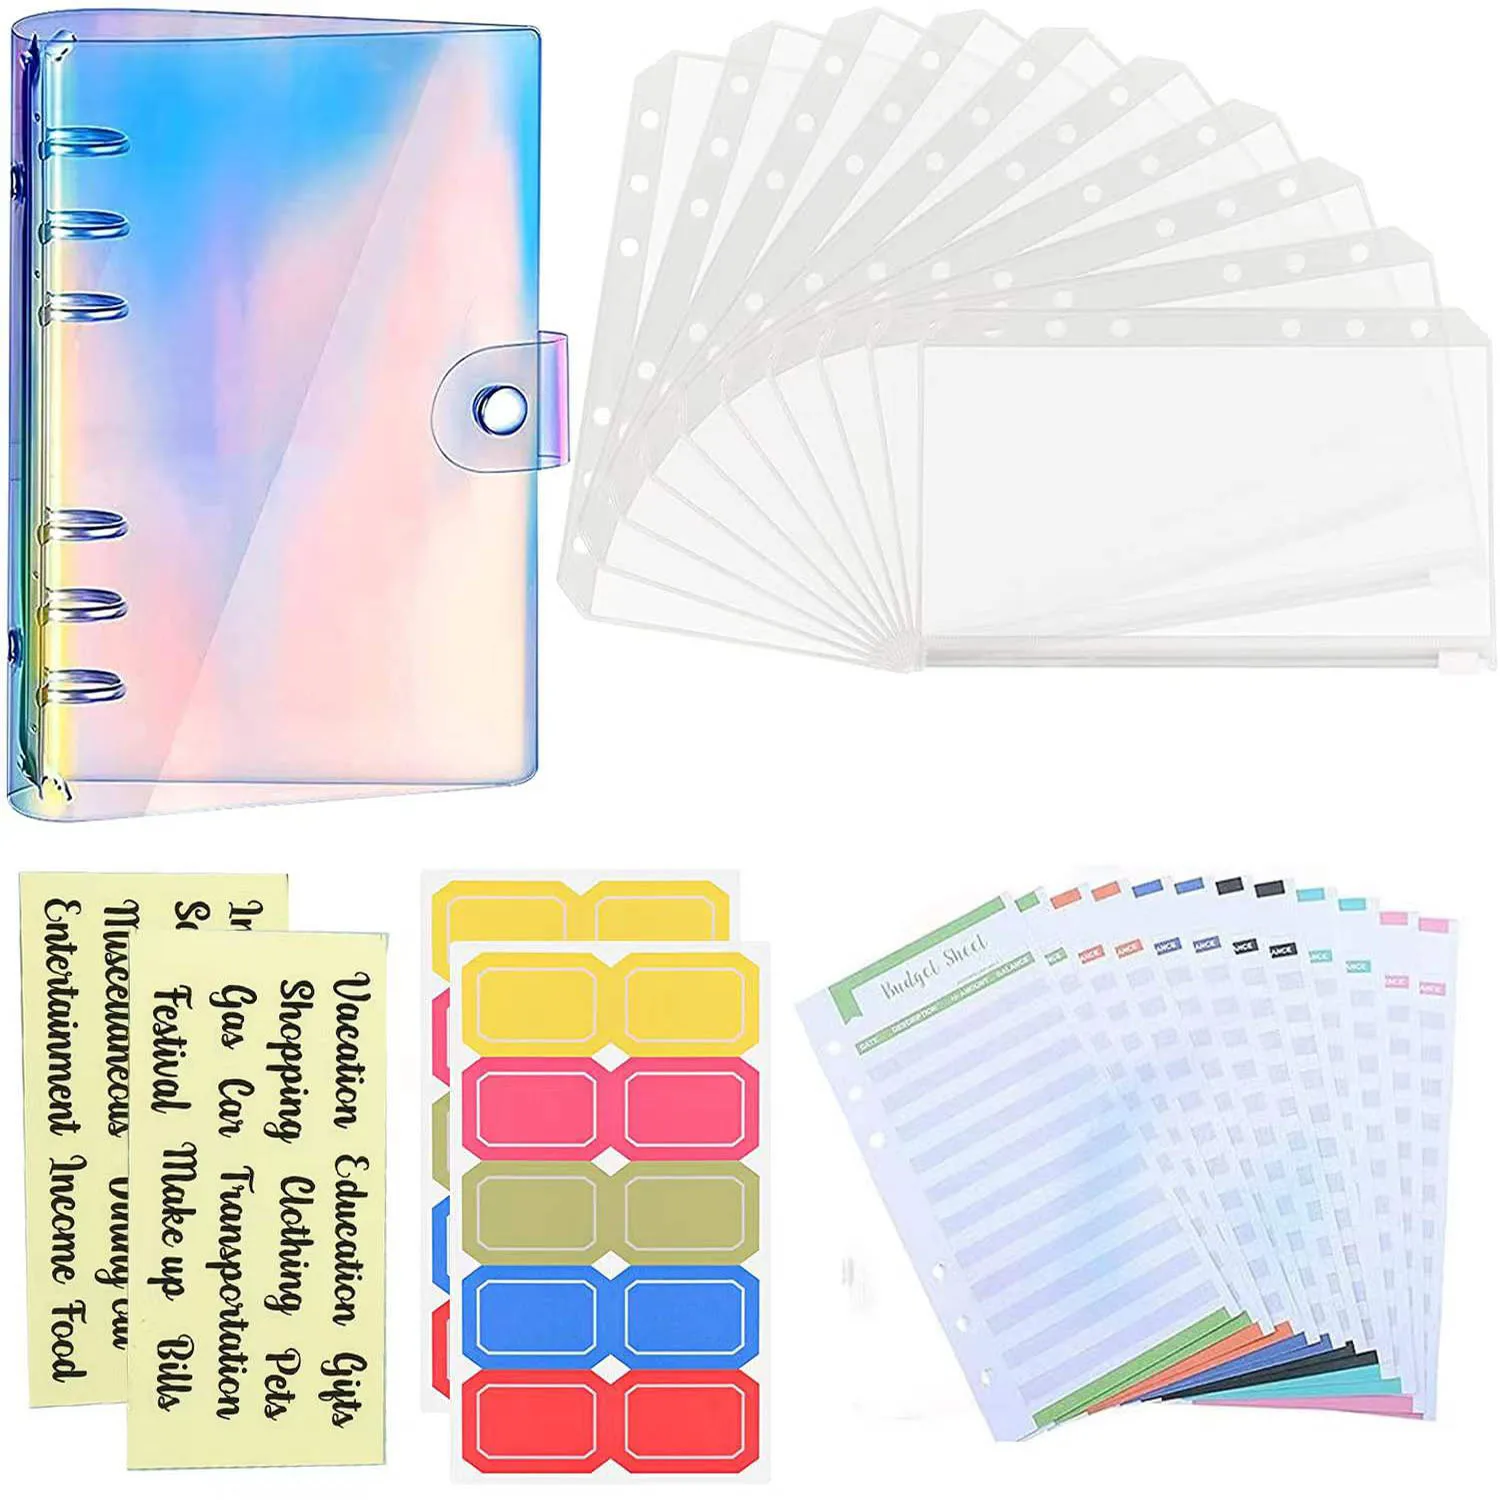 A6 Budget Binder Waterproof Cash Envelopes Notebook Organizer System with 10 Zipper Pockets,12 Budget Sheet and Label Stickers a5 a6 6 hole binder pockets waterproof pvc cash budget envelopes zipper binder pouches for notebook planner journey binders